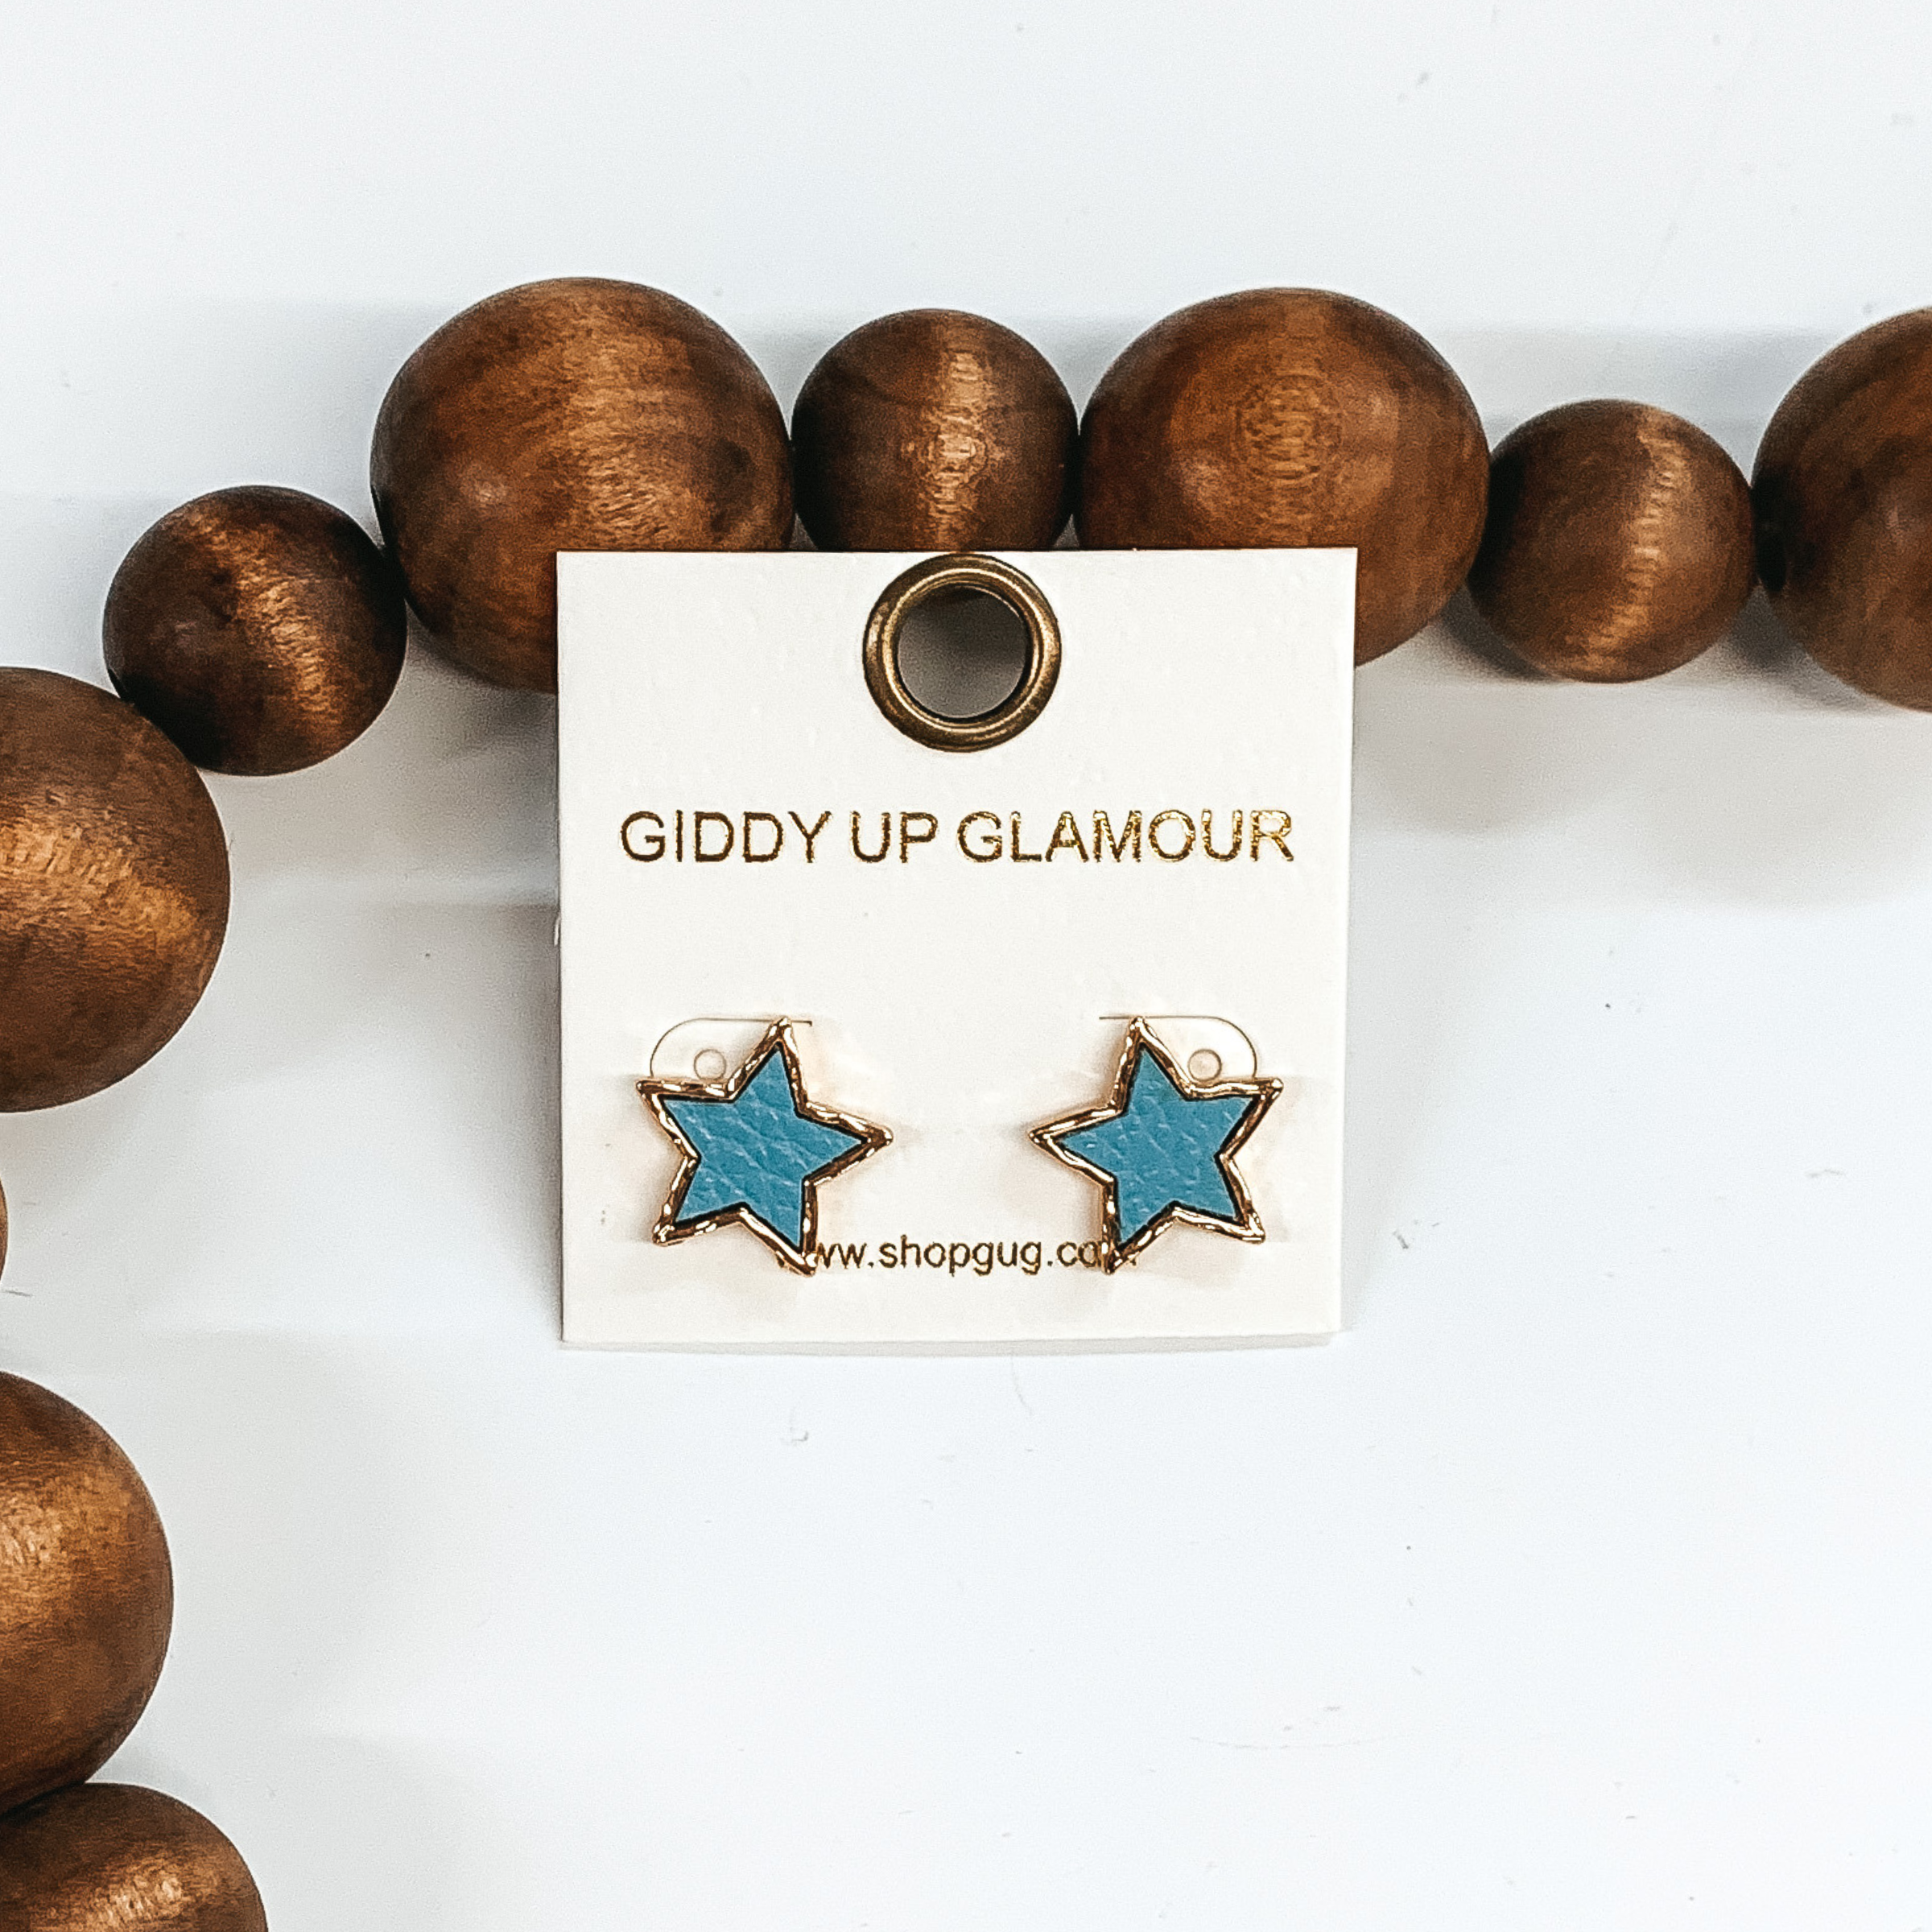 Lost in the Stars Stud Earrings in Blue - Giddy Up Glamour Boutique